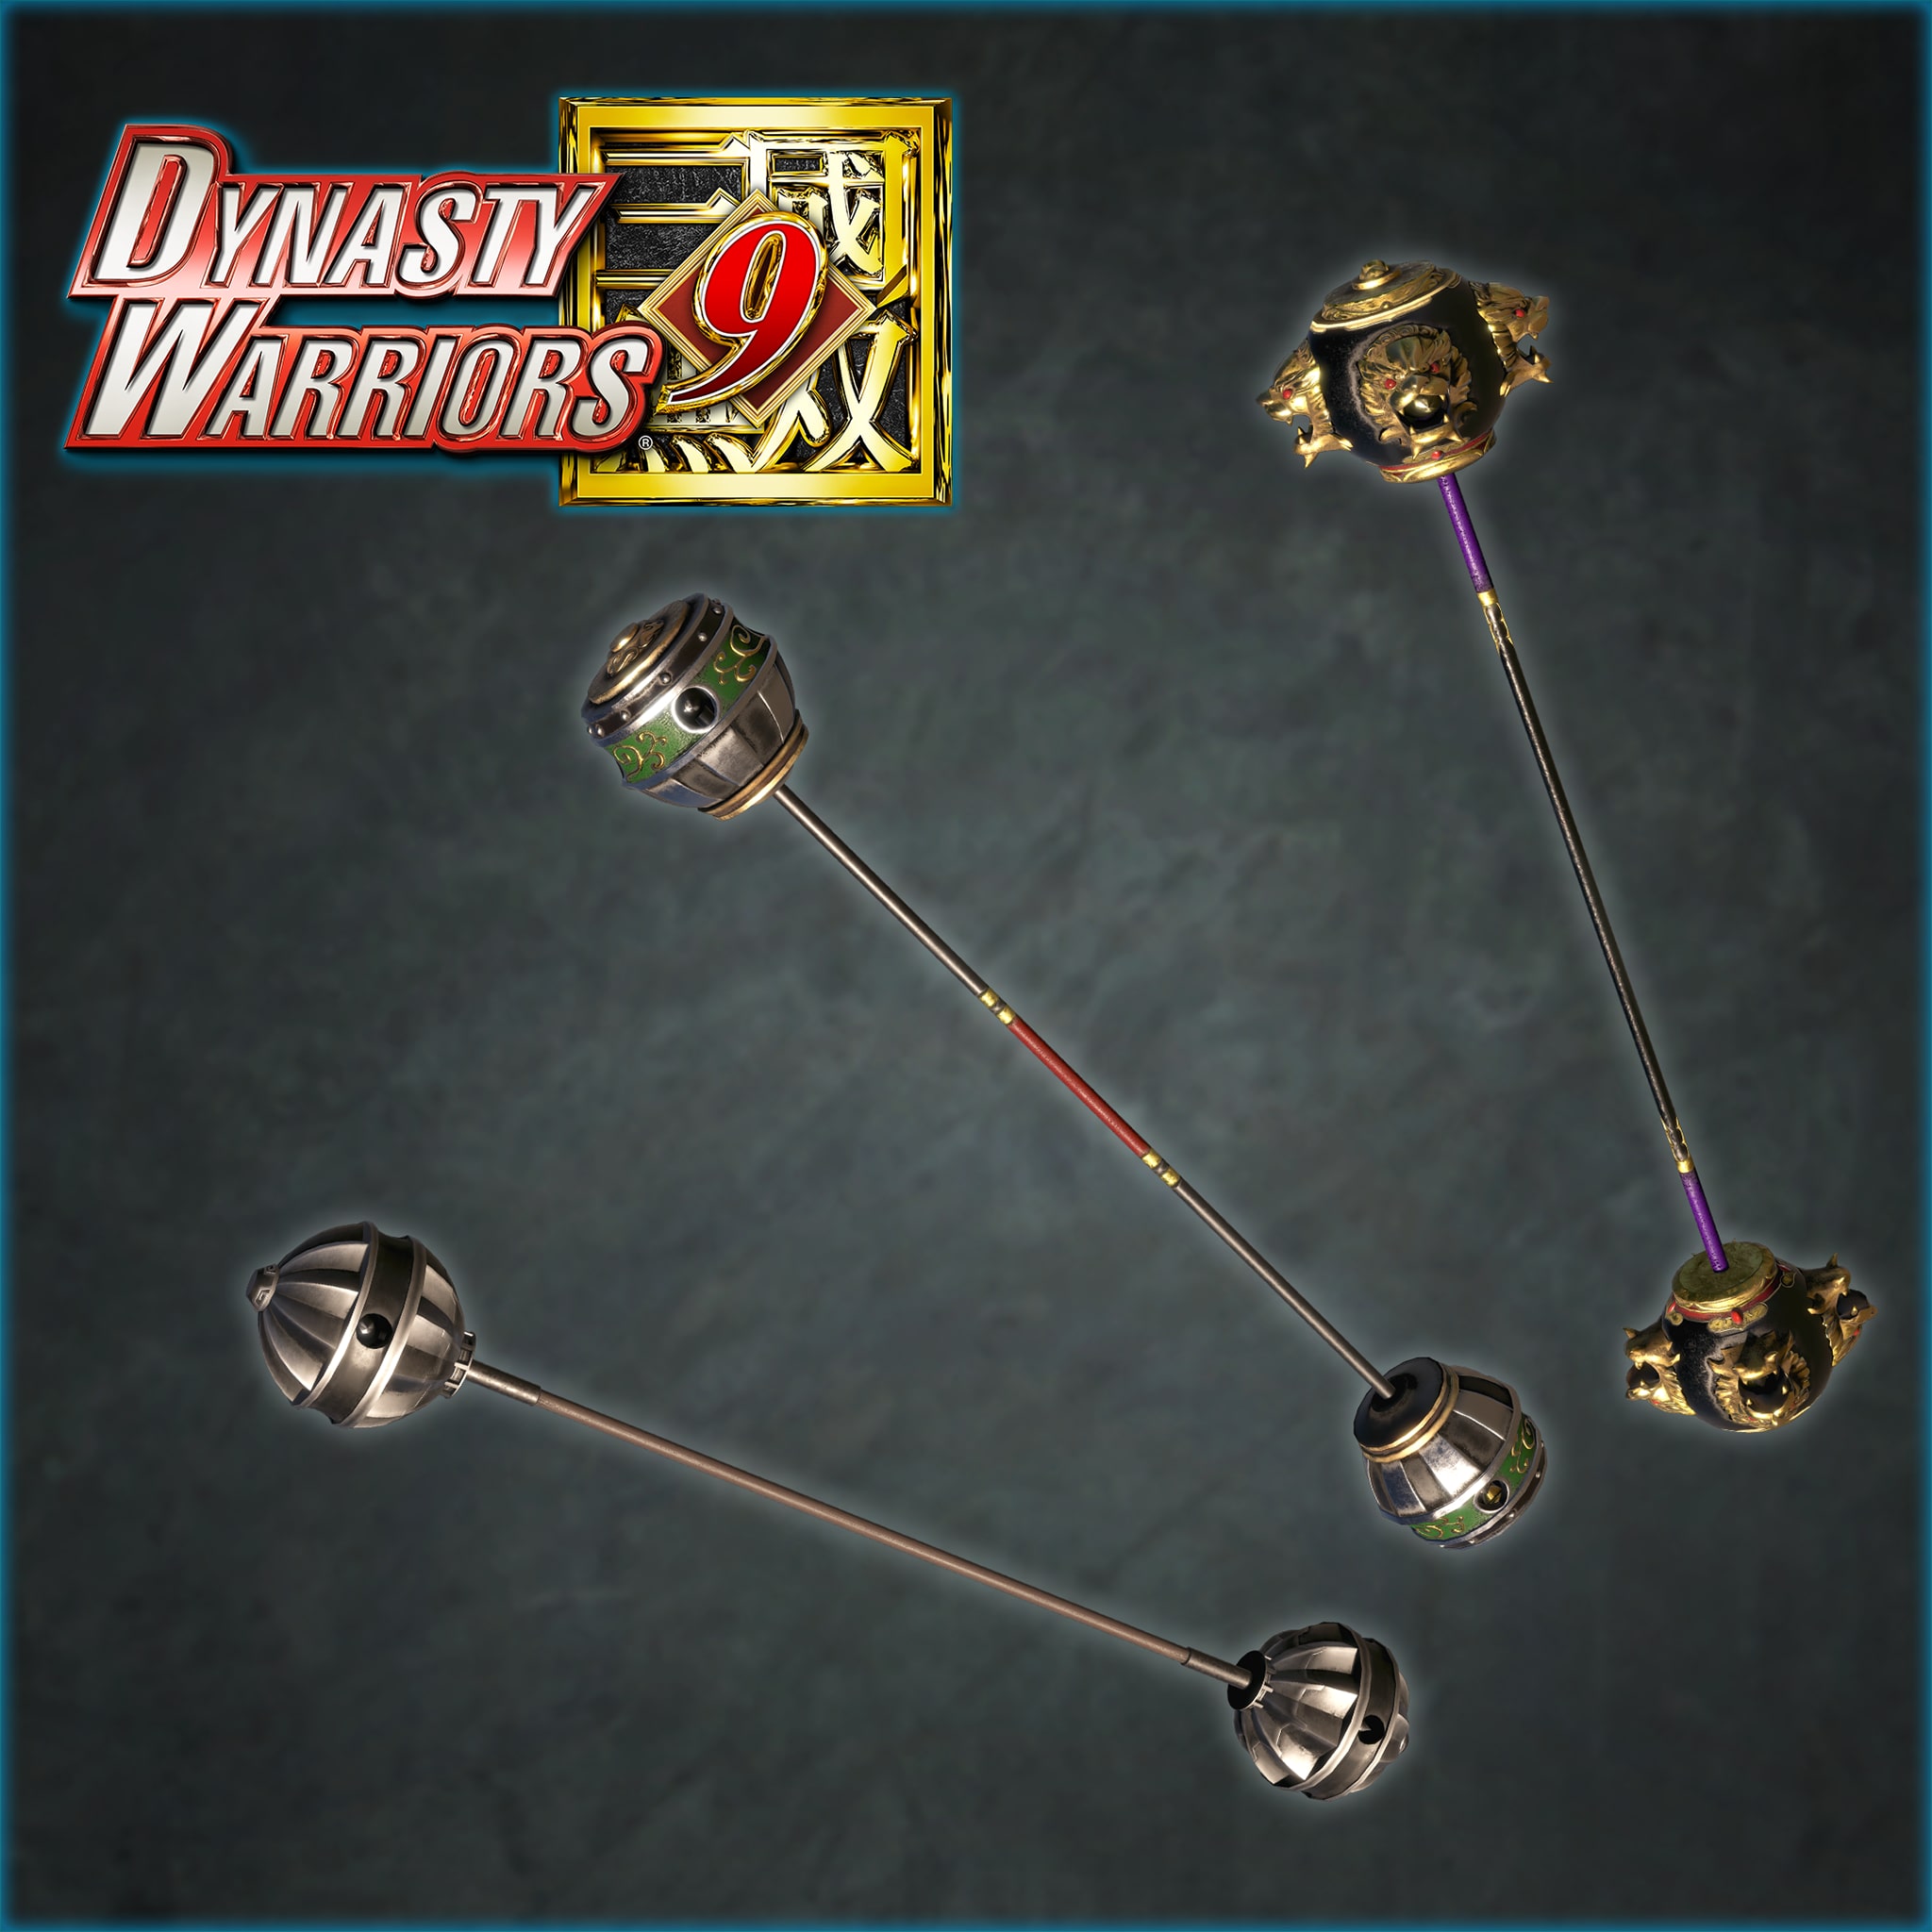 DYNASTY WARRIORS 9: Additional Weapon 'Tempest Mace'